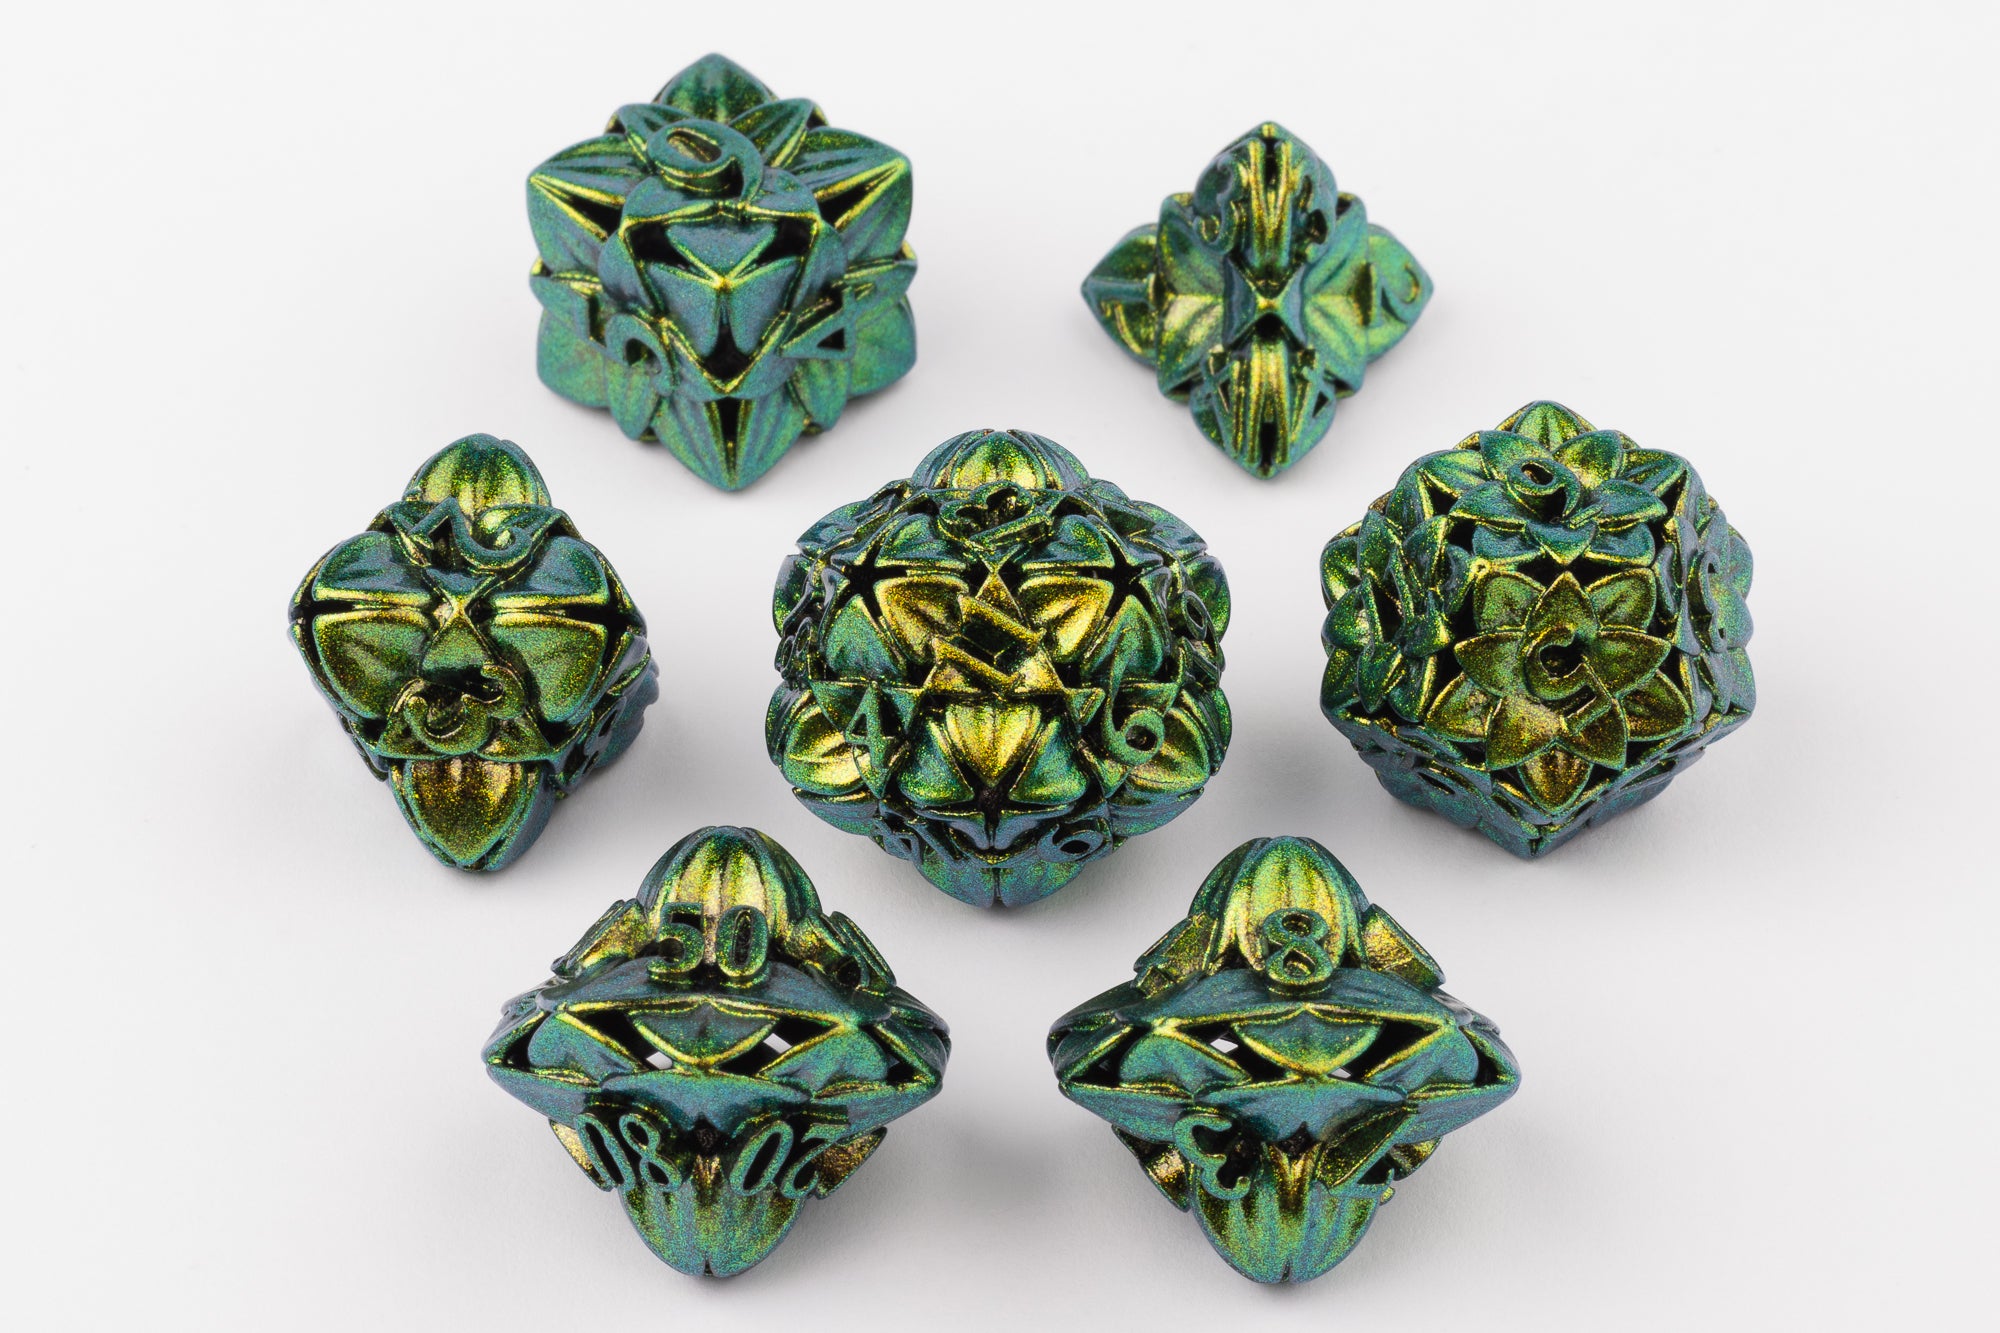 Dryad's Hollow Polyhedral Dice Set